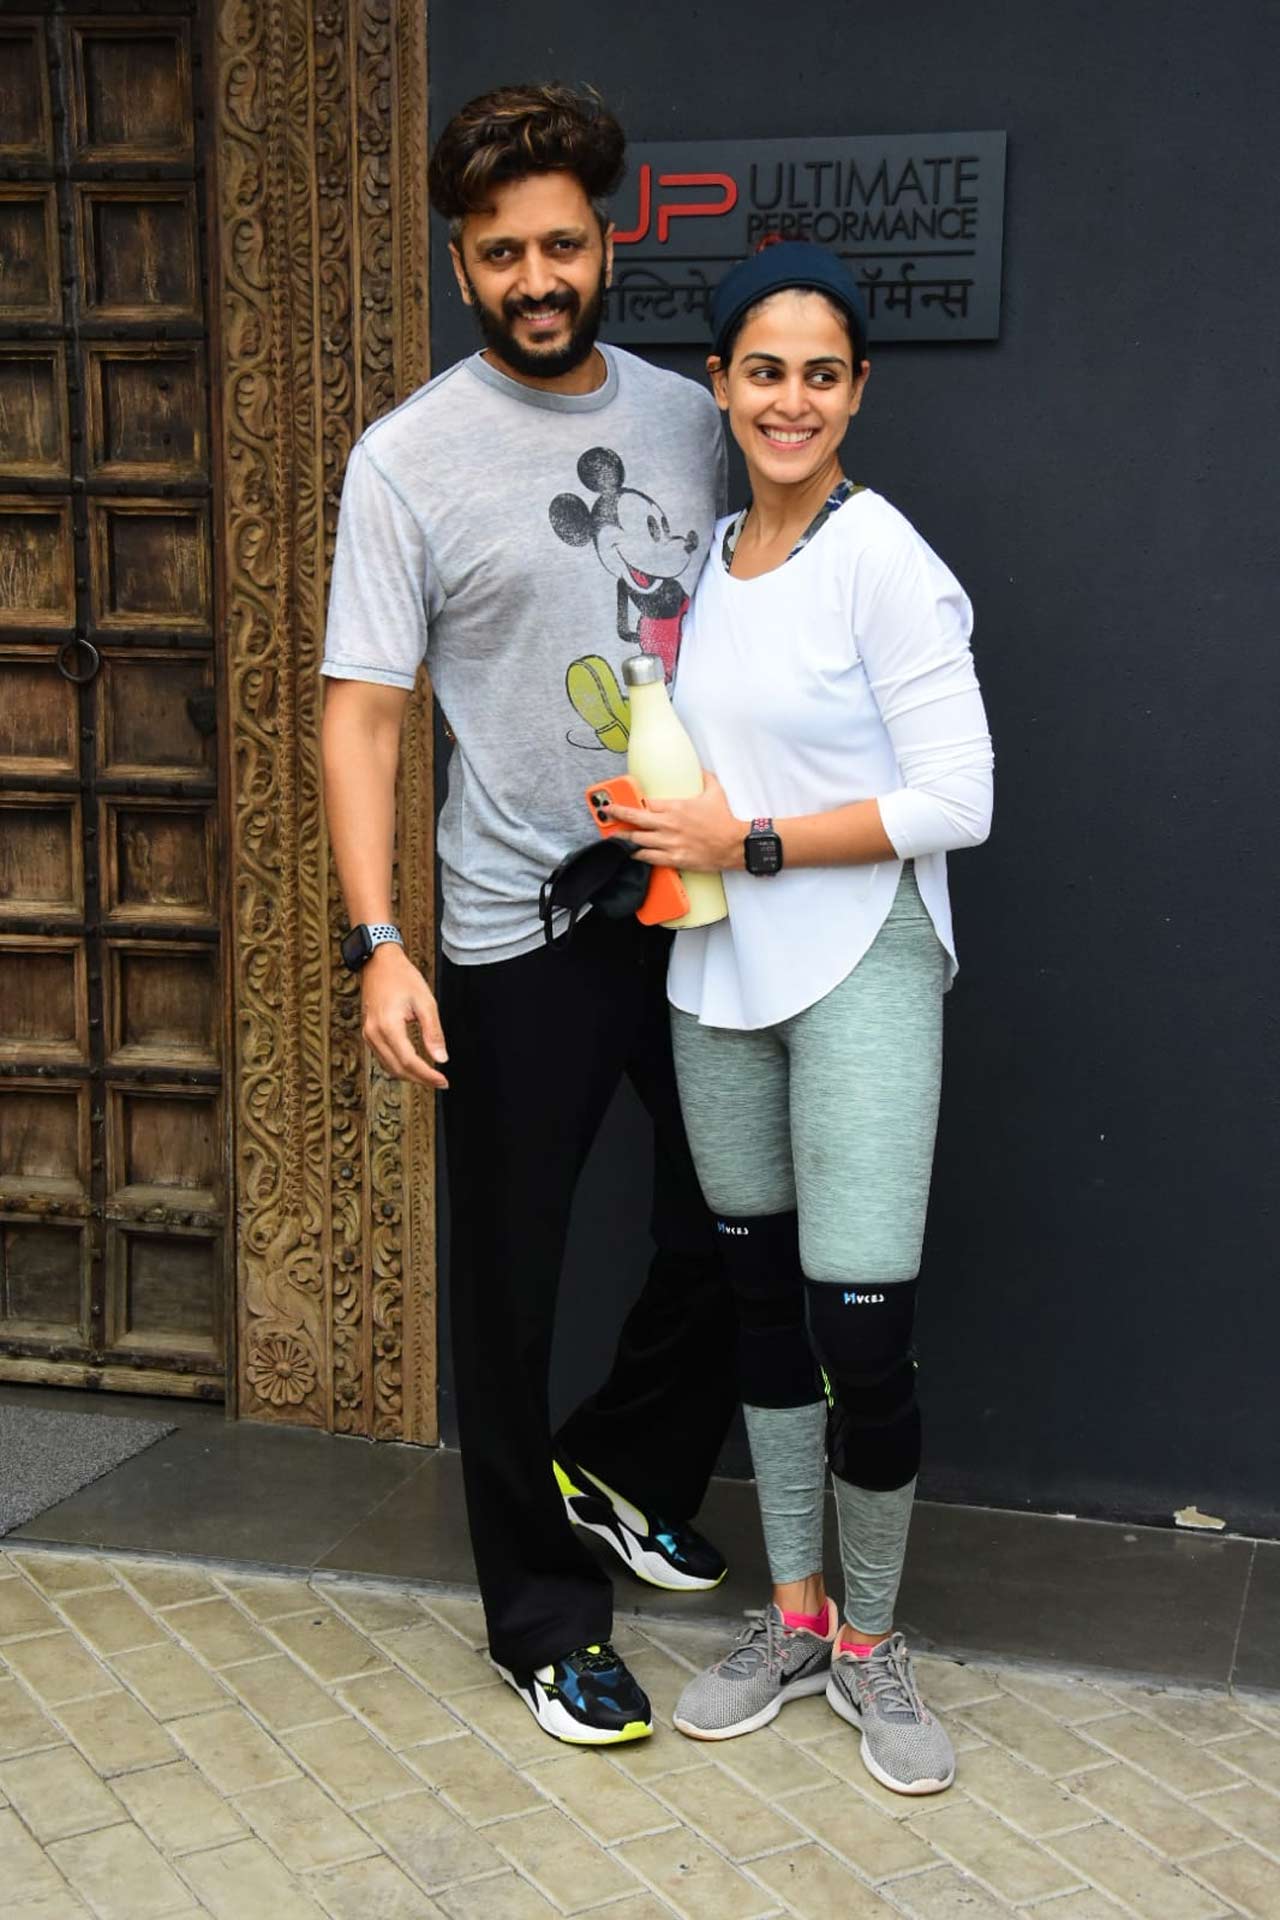 Riteish Deshmukh and Genelia D'Souza, the power couple of Bollywood, were snapped working out together at a popular gym in Bandra.